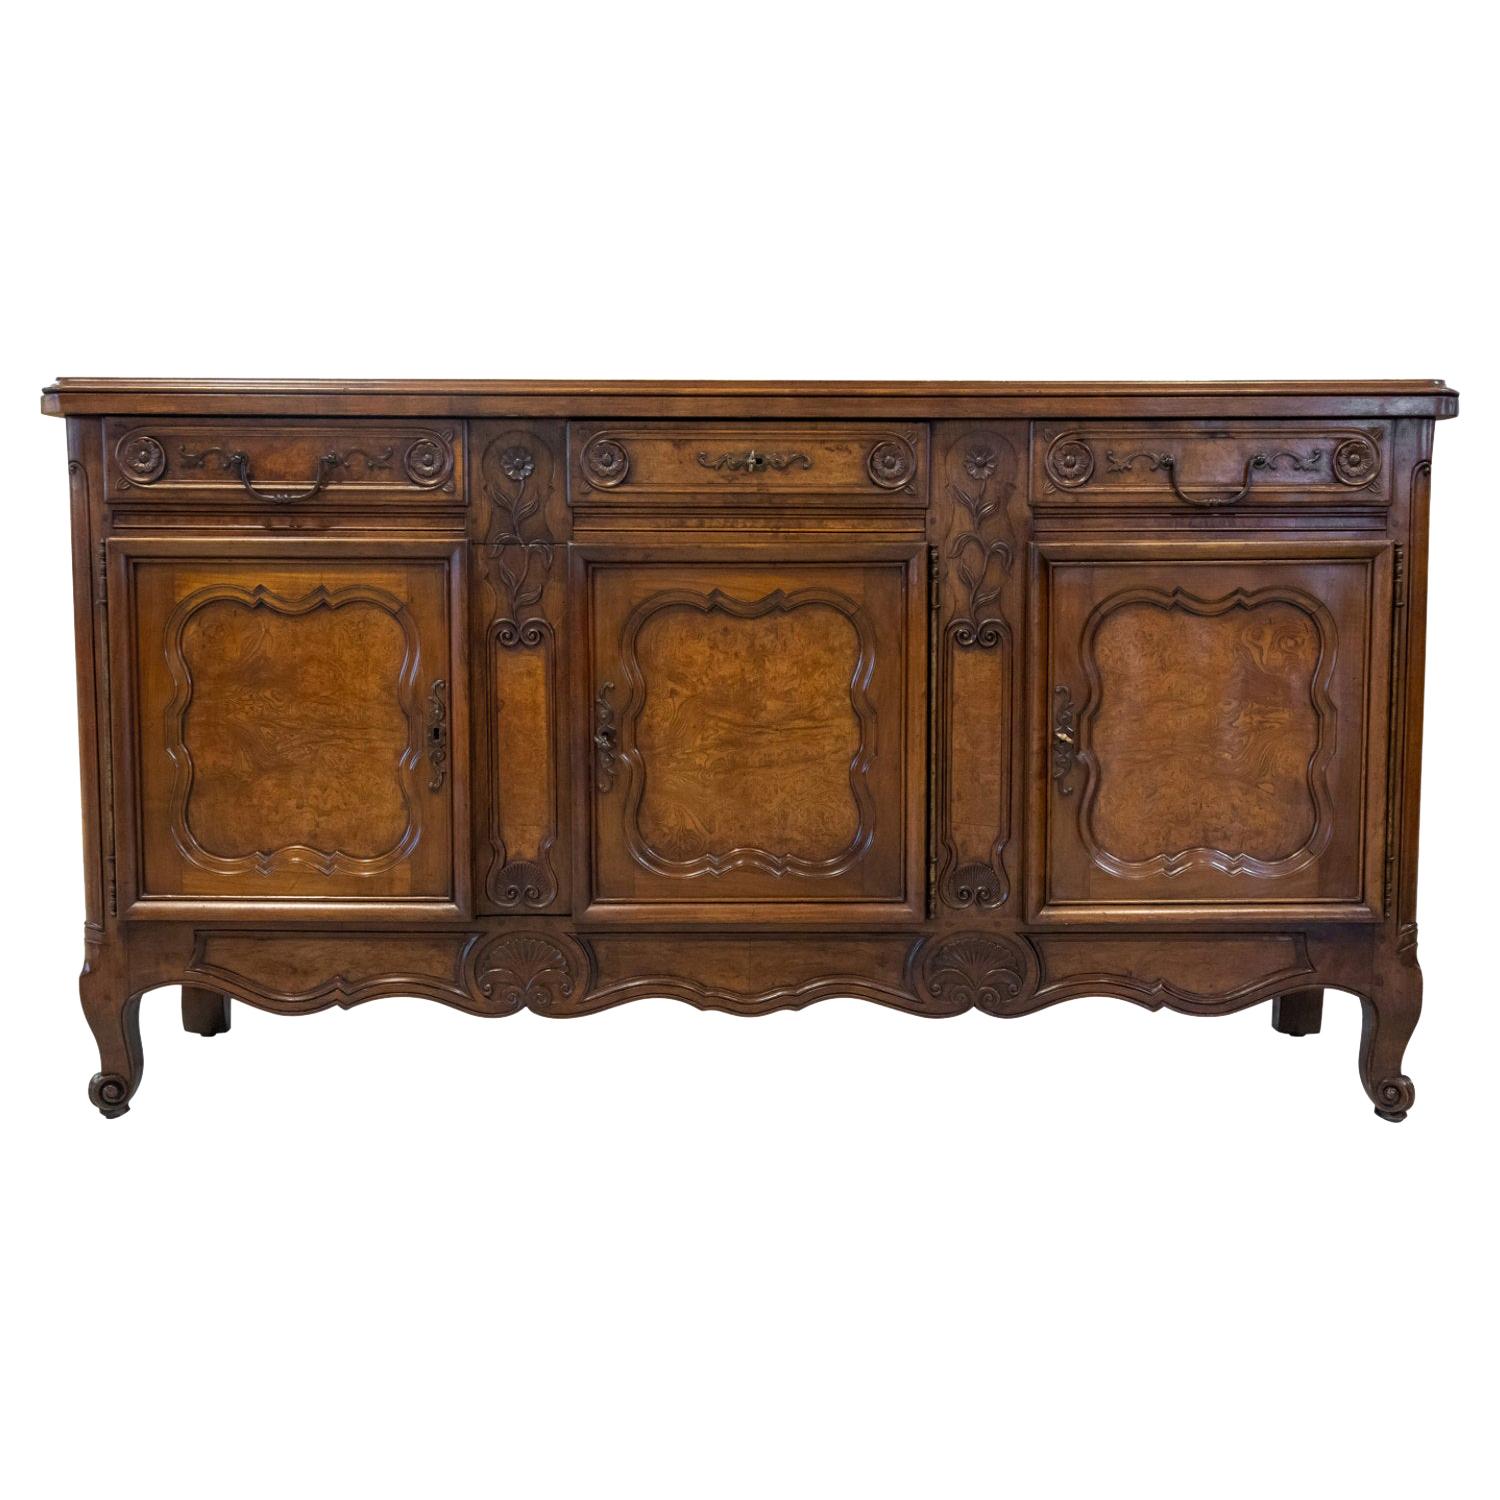 19th Century French Country Louis XV Style Bressan Enfilade Buffet